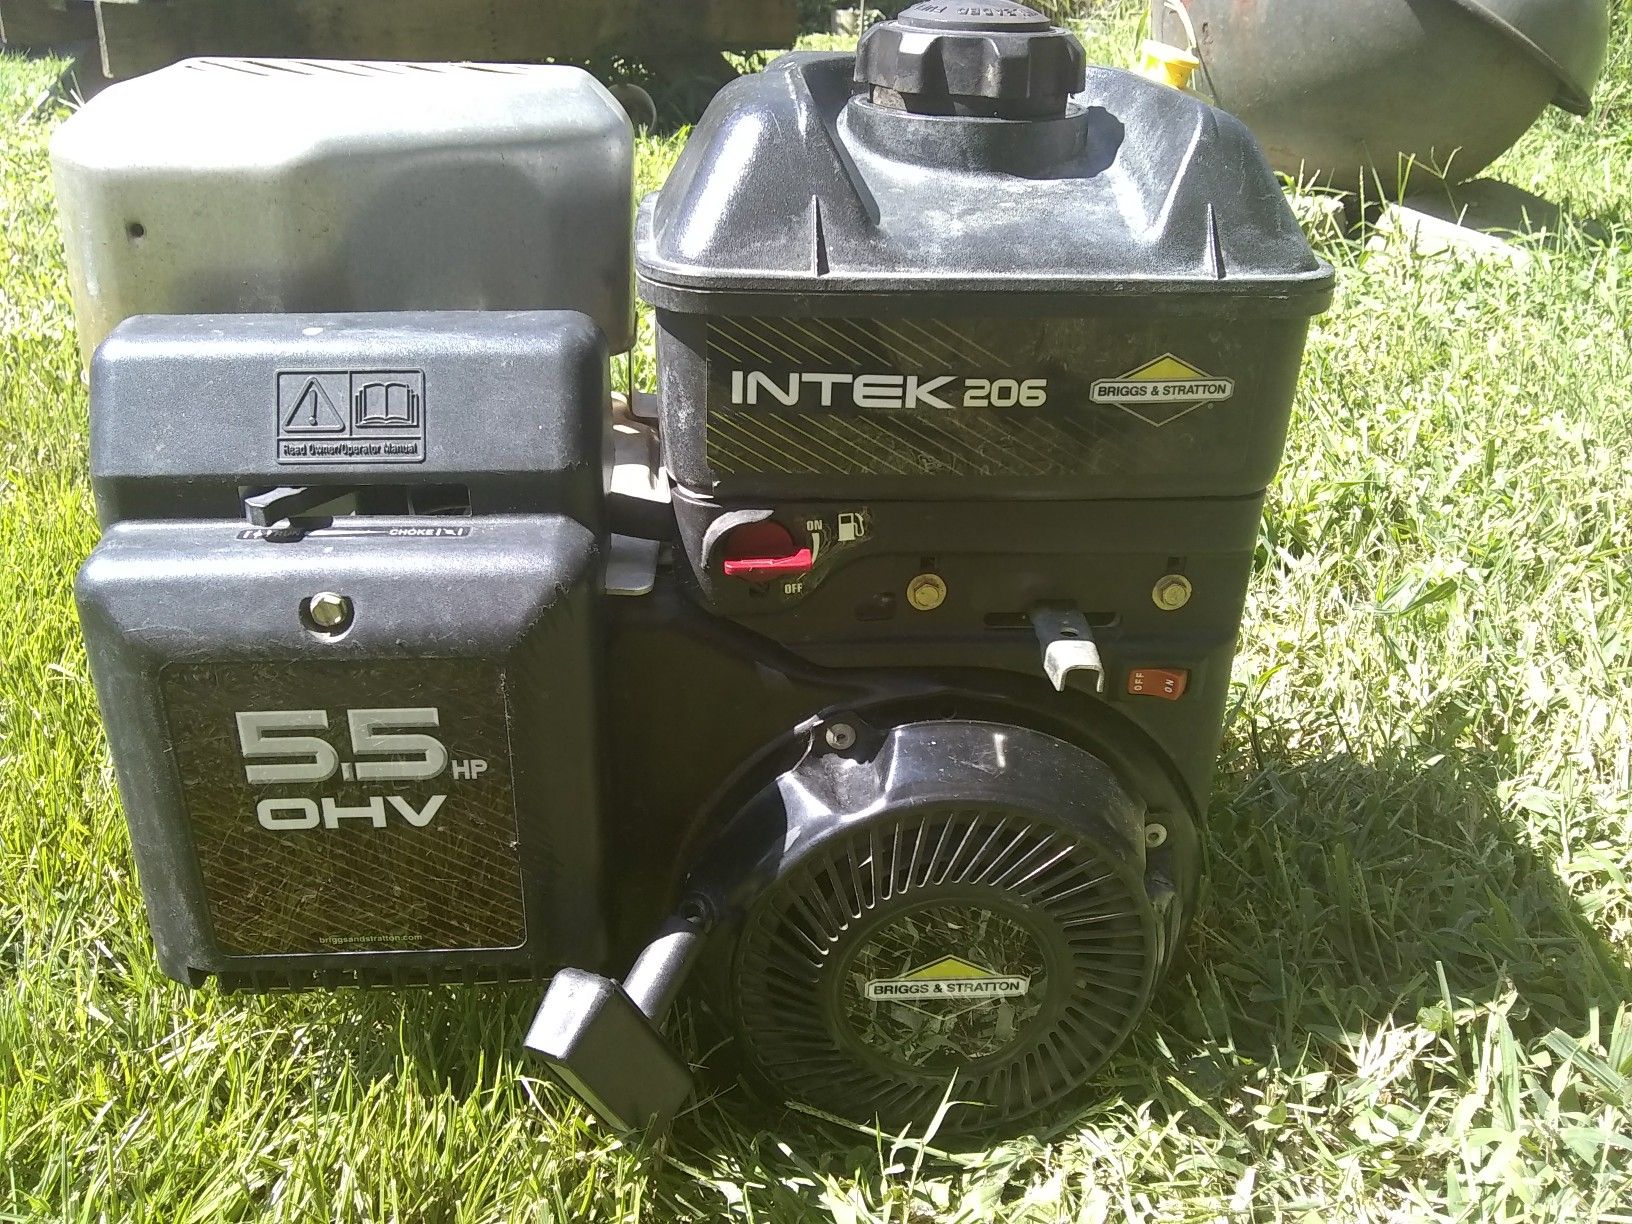 Briggs and Stratton 5.5HP Intek 206 Motor OHV Horizontal Shaft from Pressure Washer